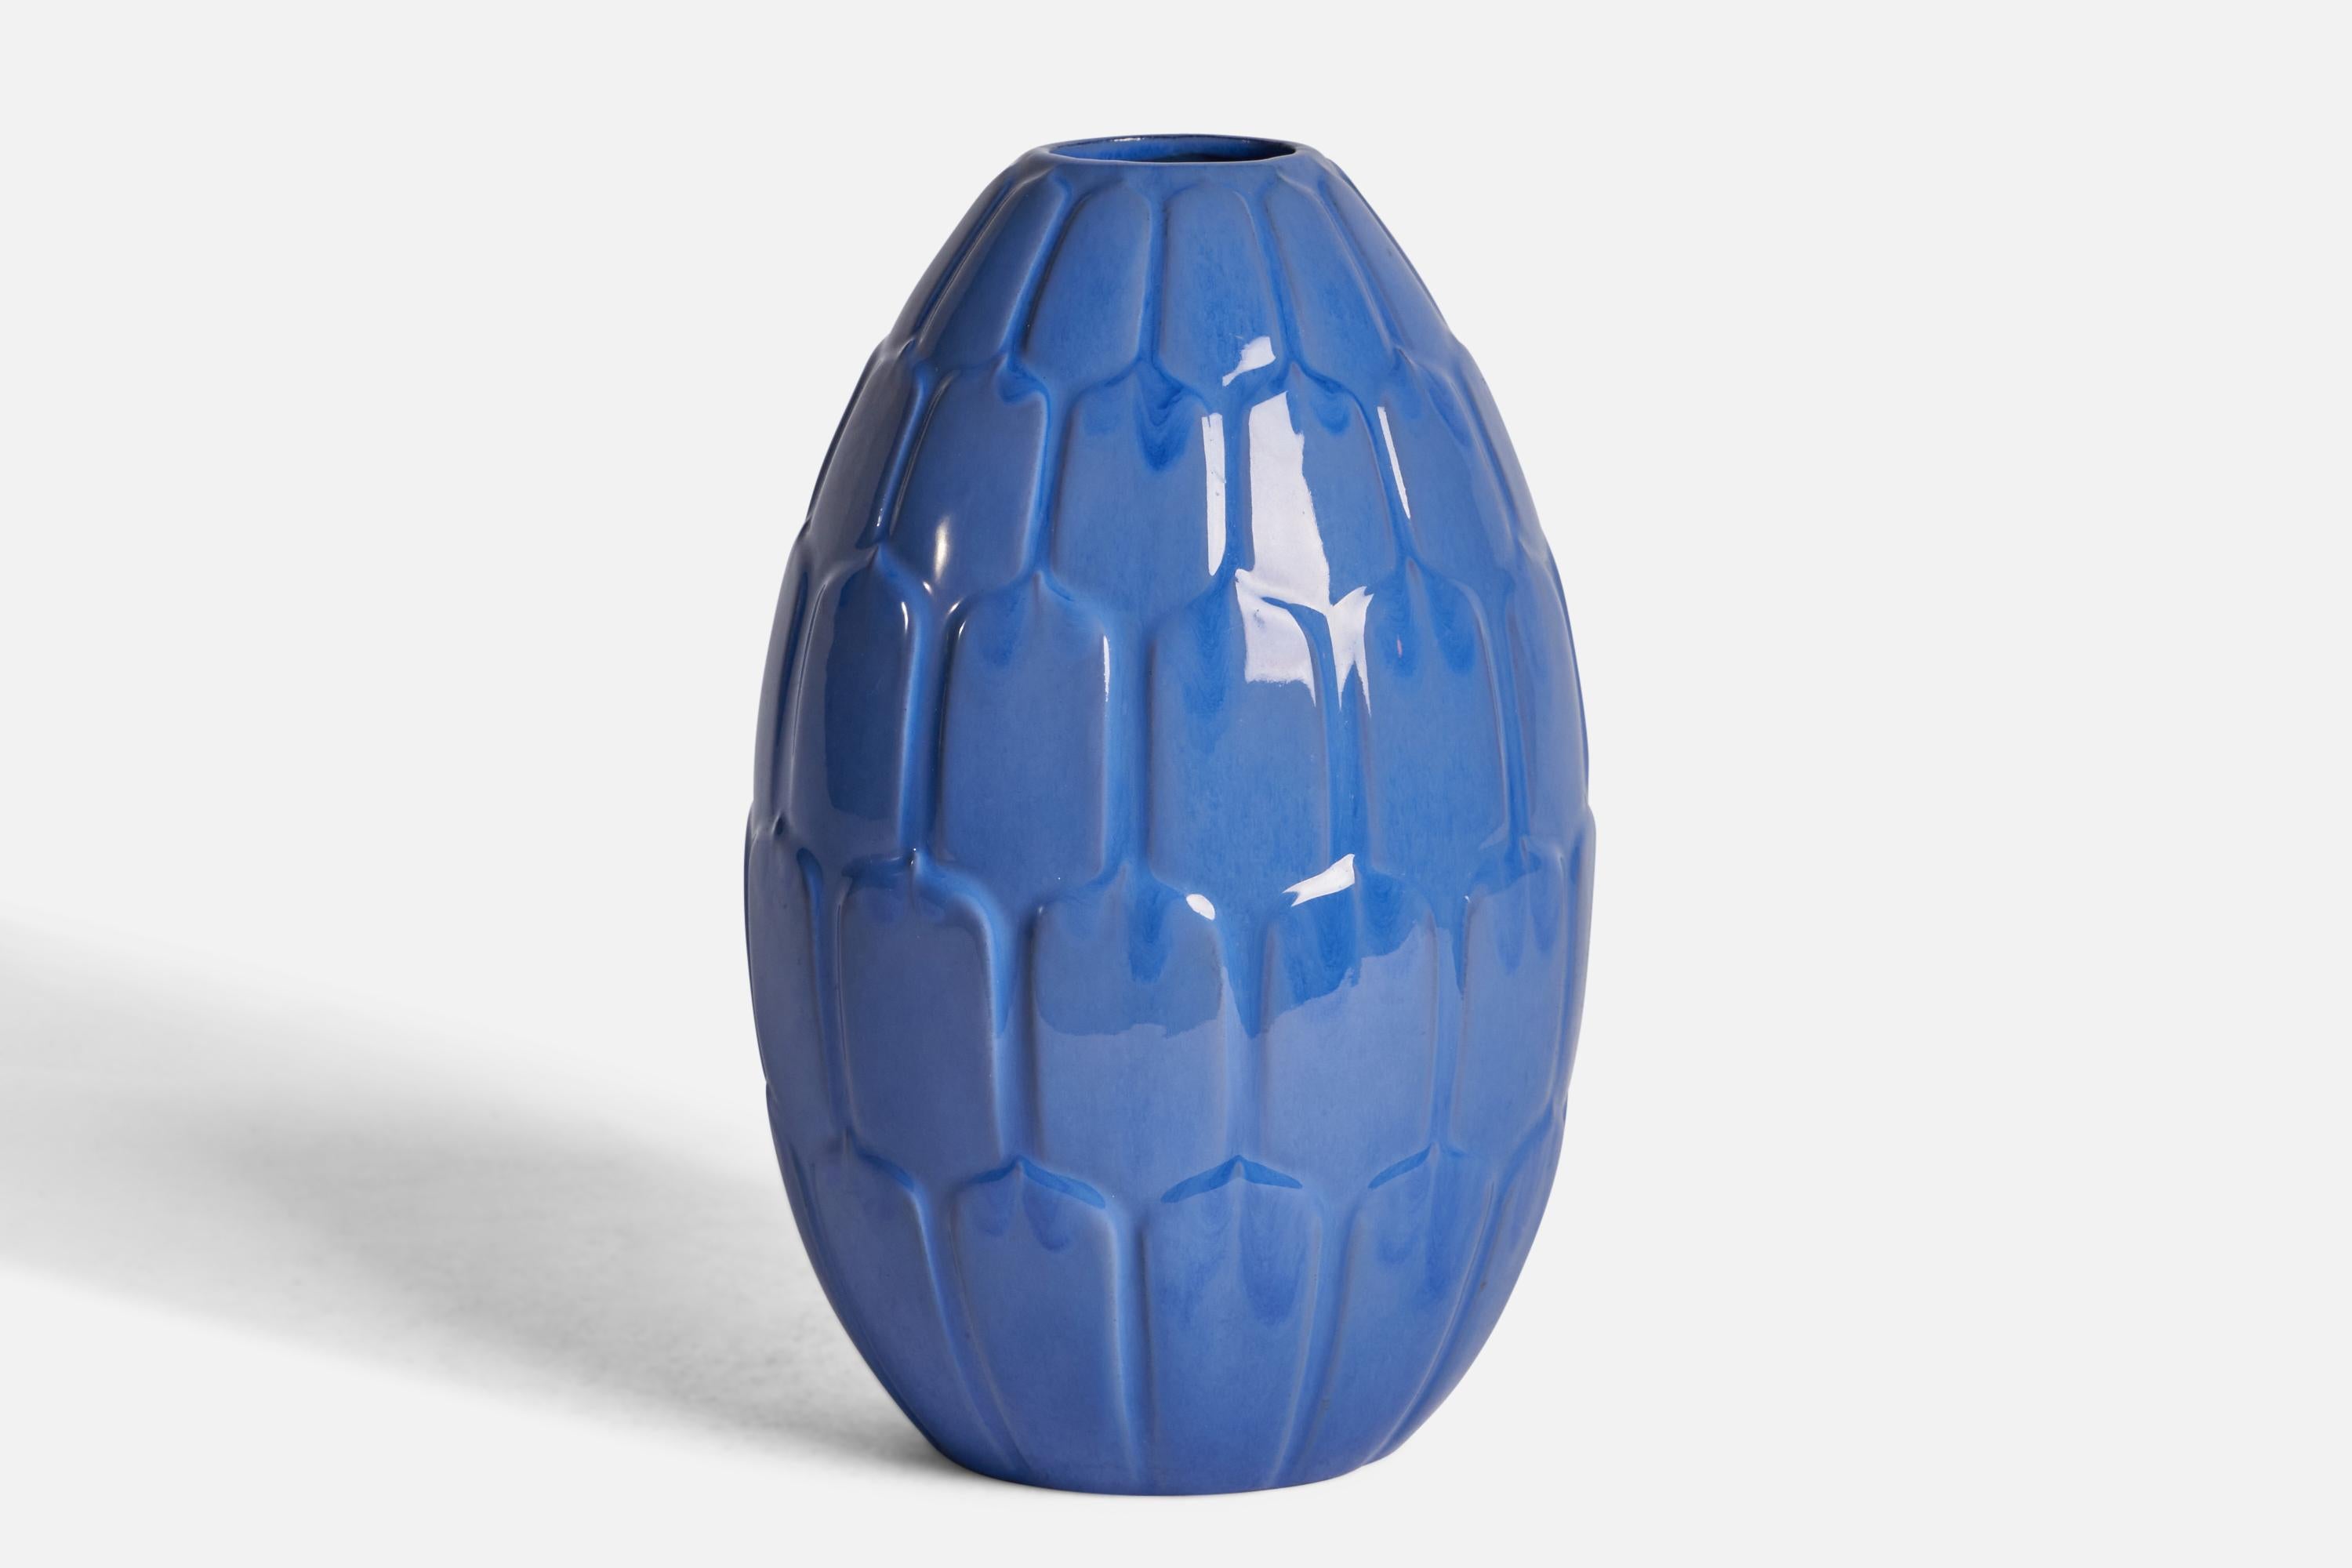 A blue-glazed earthenware vase designed by Anna-Lisa Thomson and produced by Upsala Ekeby, Sweden, c. 1930s.